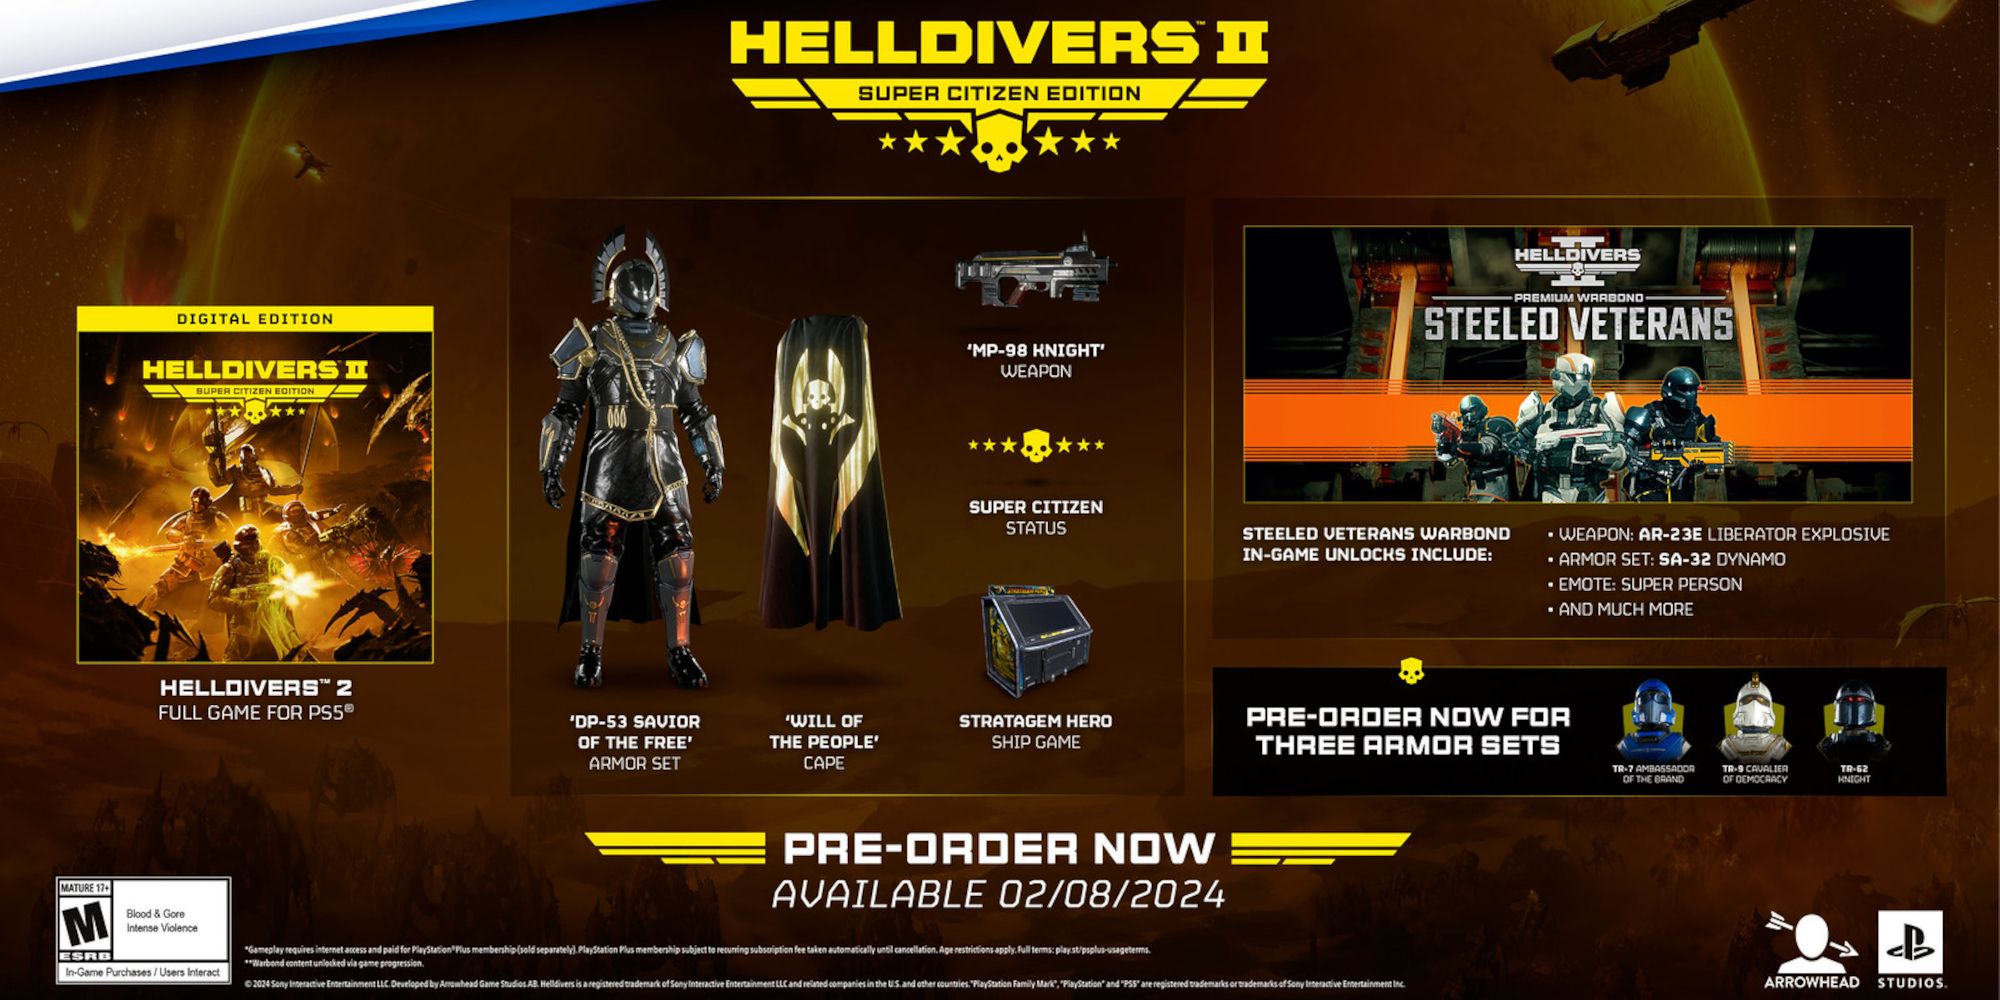 Rewards for preordering super citizen edition for Helldivers 2